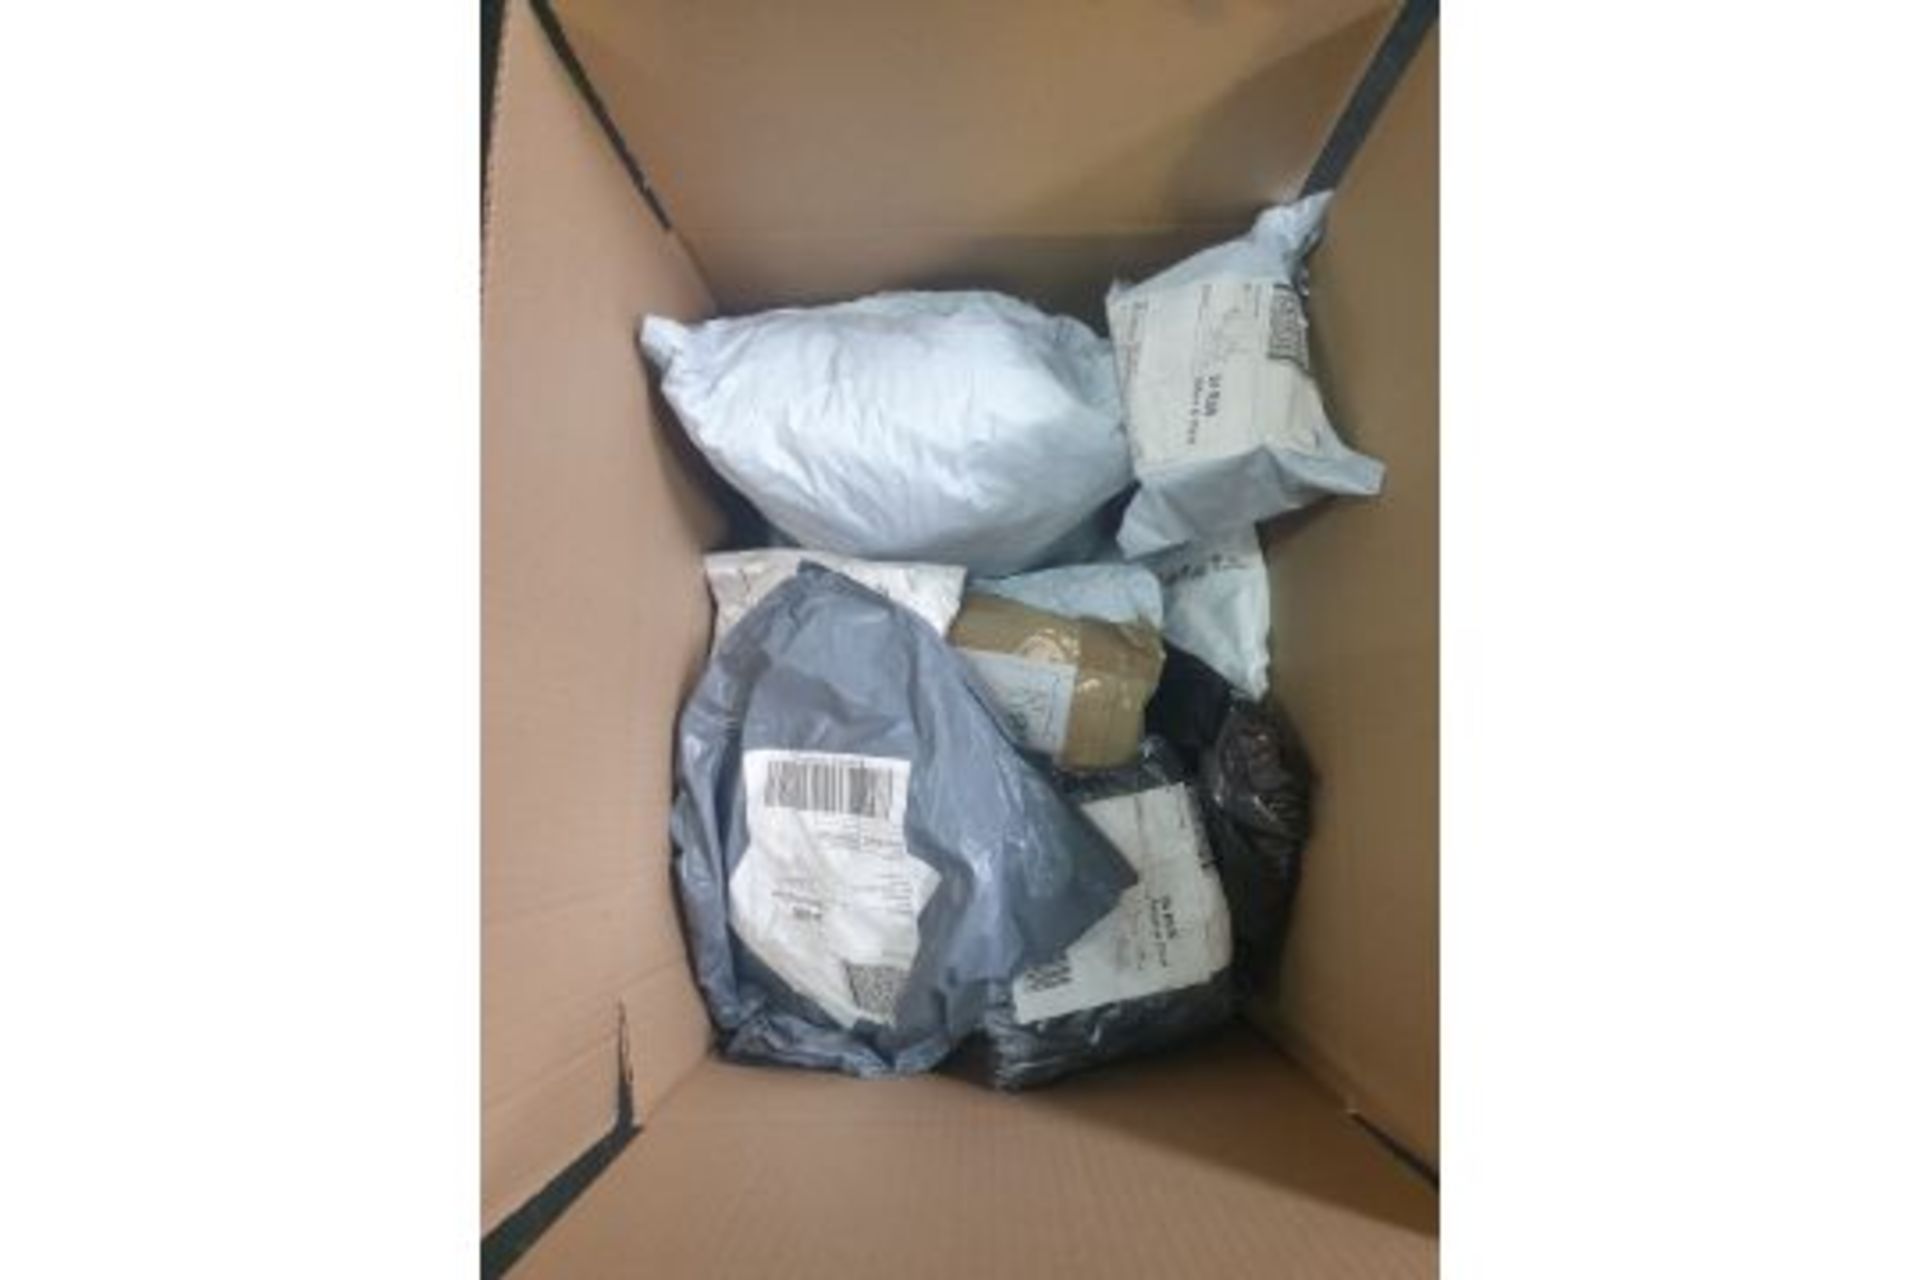 MEGA BULK LOT TO CONTAIN 500 x UNCHECKED COURIER/INTERNET RETURNS. CONDITION & ITEMS UNKNOWN. - Image 3 of 9